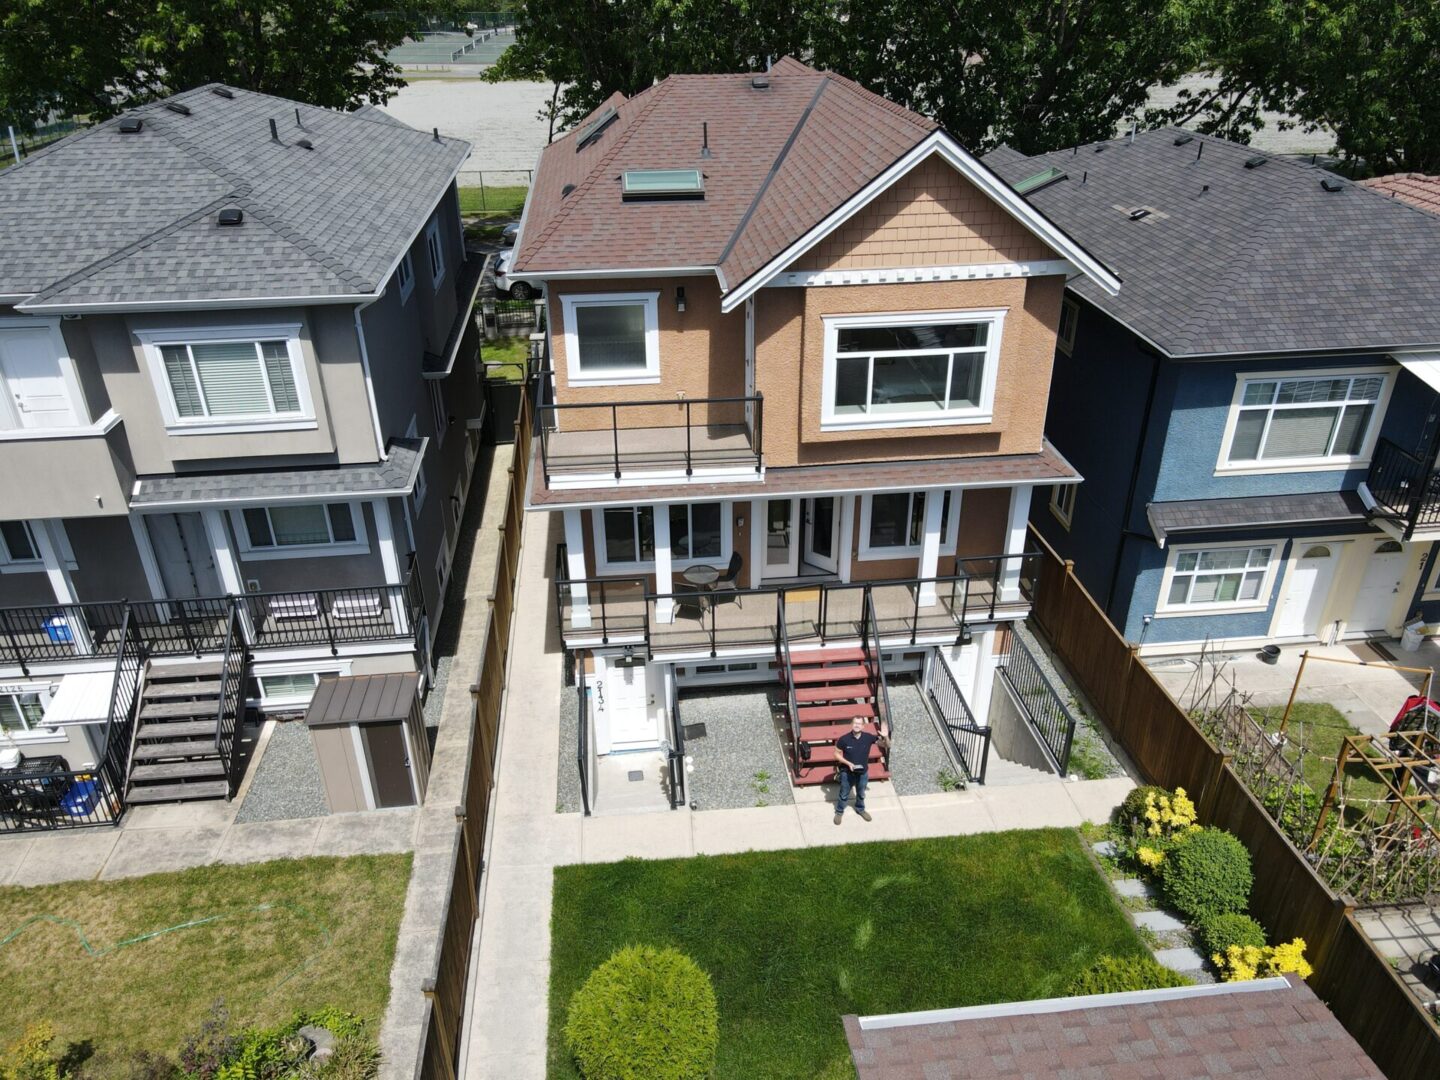 Aerial view of a two-story house with a well-maintained lawn in the backyard. A person is sitting on a chair in the backyard. Surrounding houses have similar architectural styles.